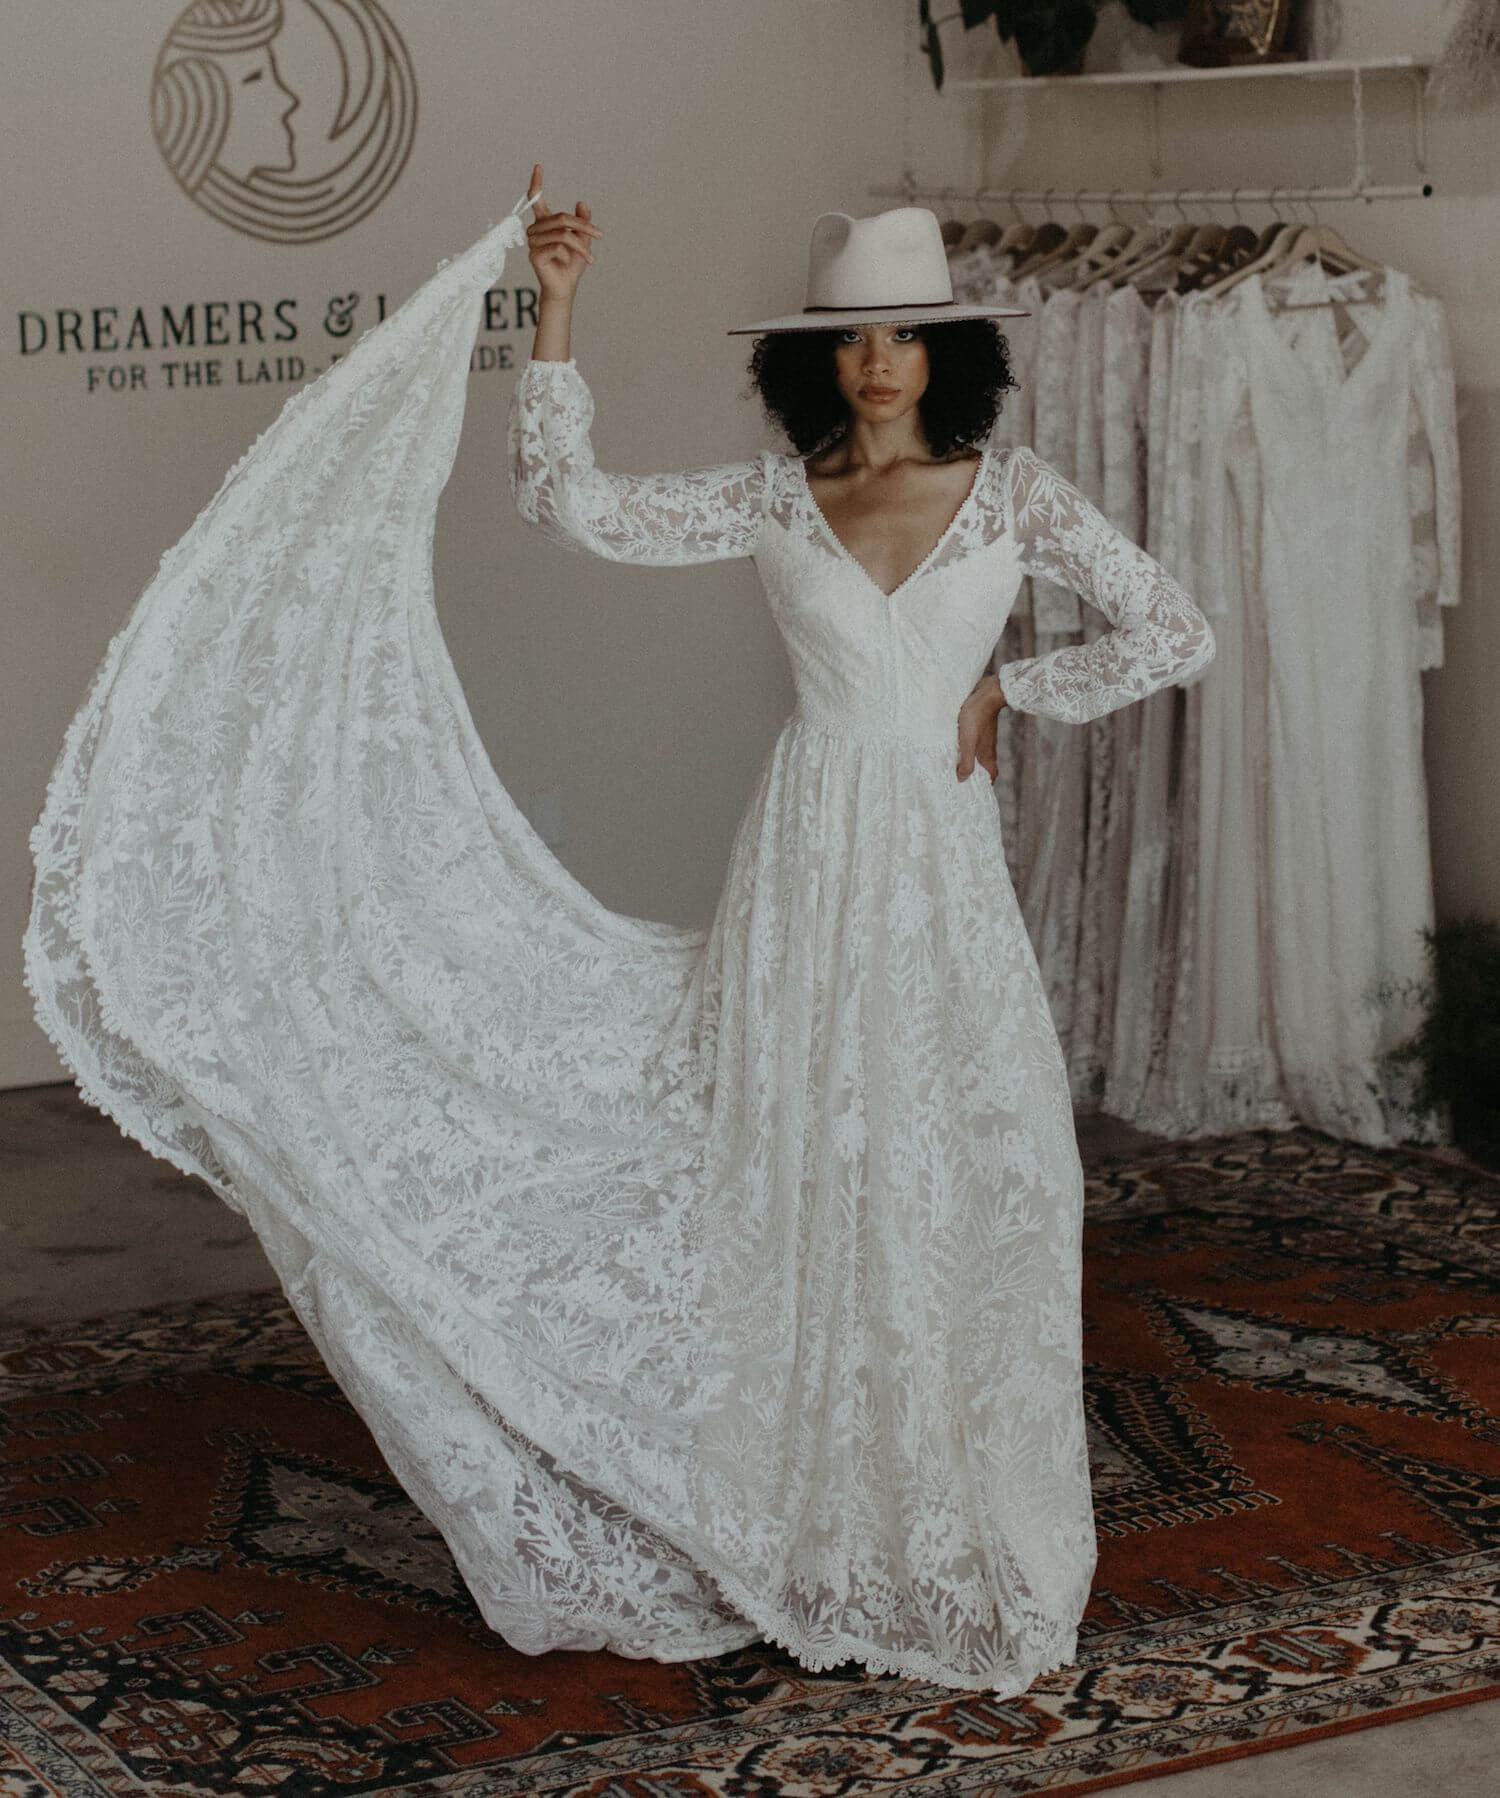 Wedding Gown Designs We Fell in Love With - Weva Photography